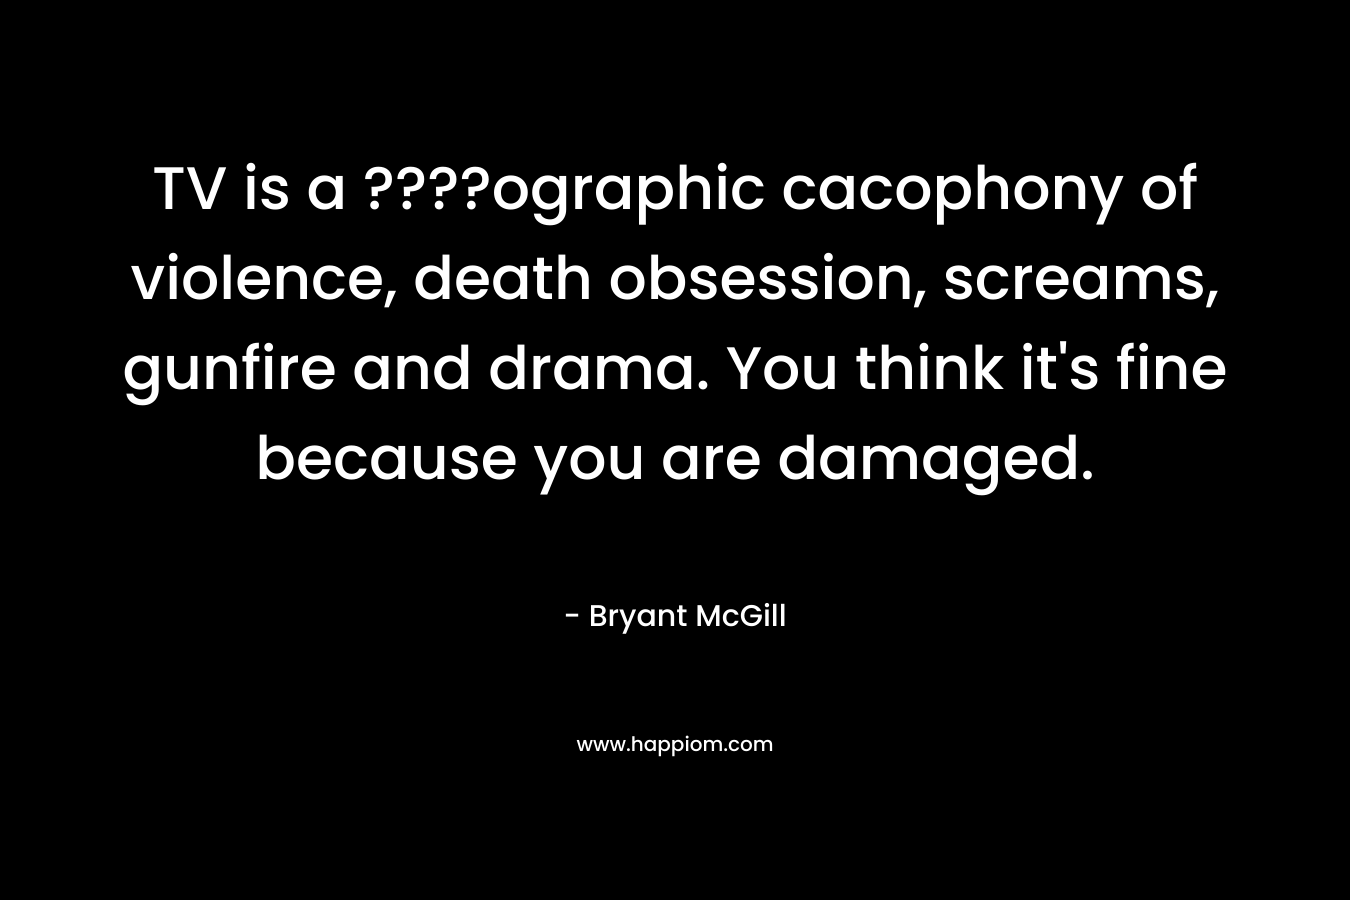 TV is a ????ographic cacophony of violence, death obsession, screams, gunfire and drama. You think it’s fine because you are damaged. – Bryant McGill